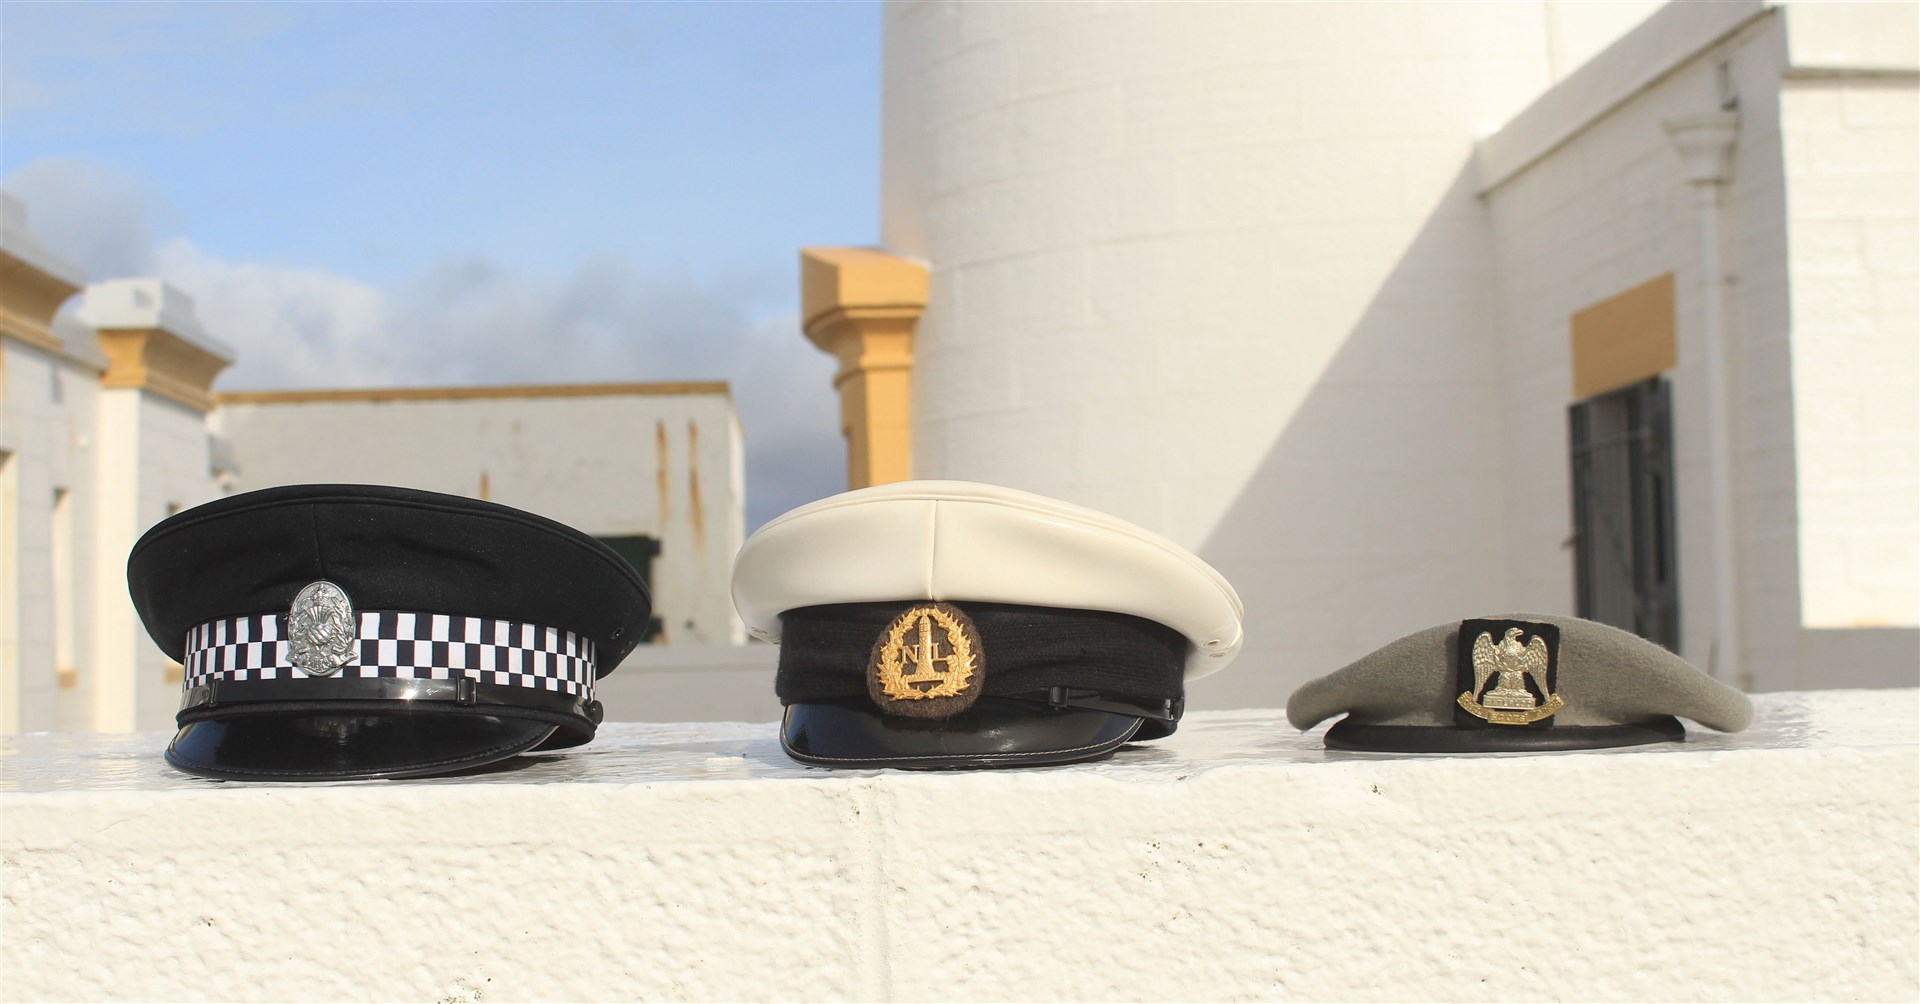 David has kept these three caps representing different phases in his working life – in the police force, the lighthouse service and the army. Picture: Alan Hendry